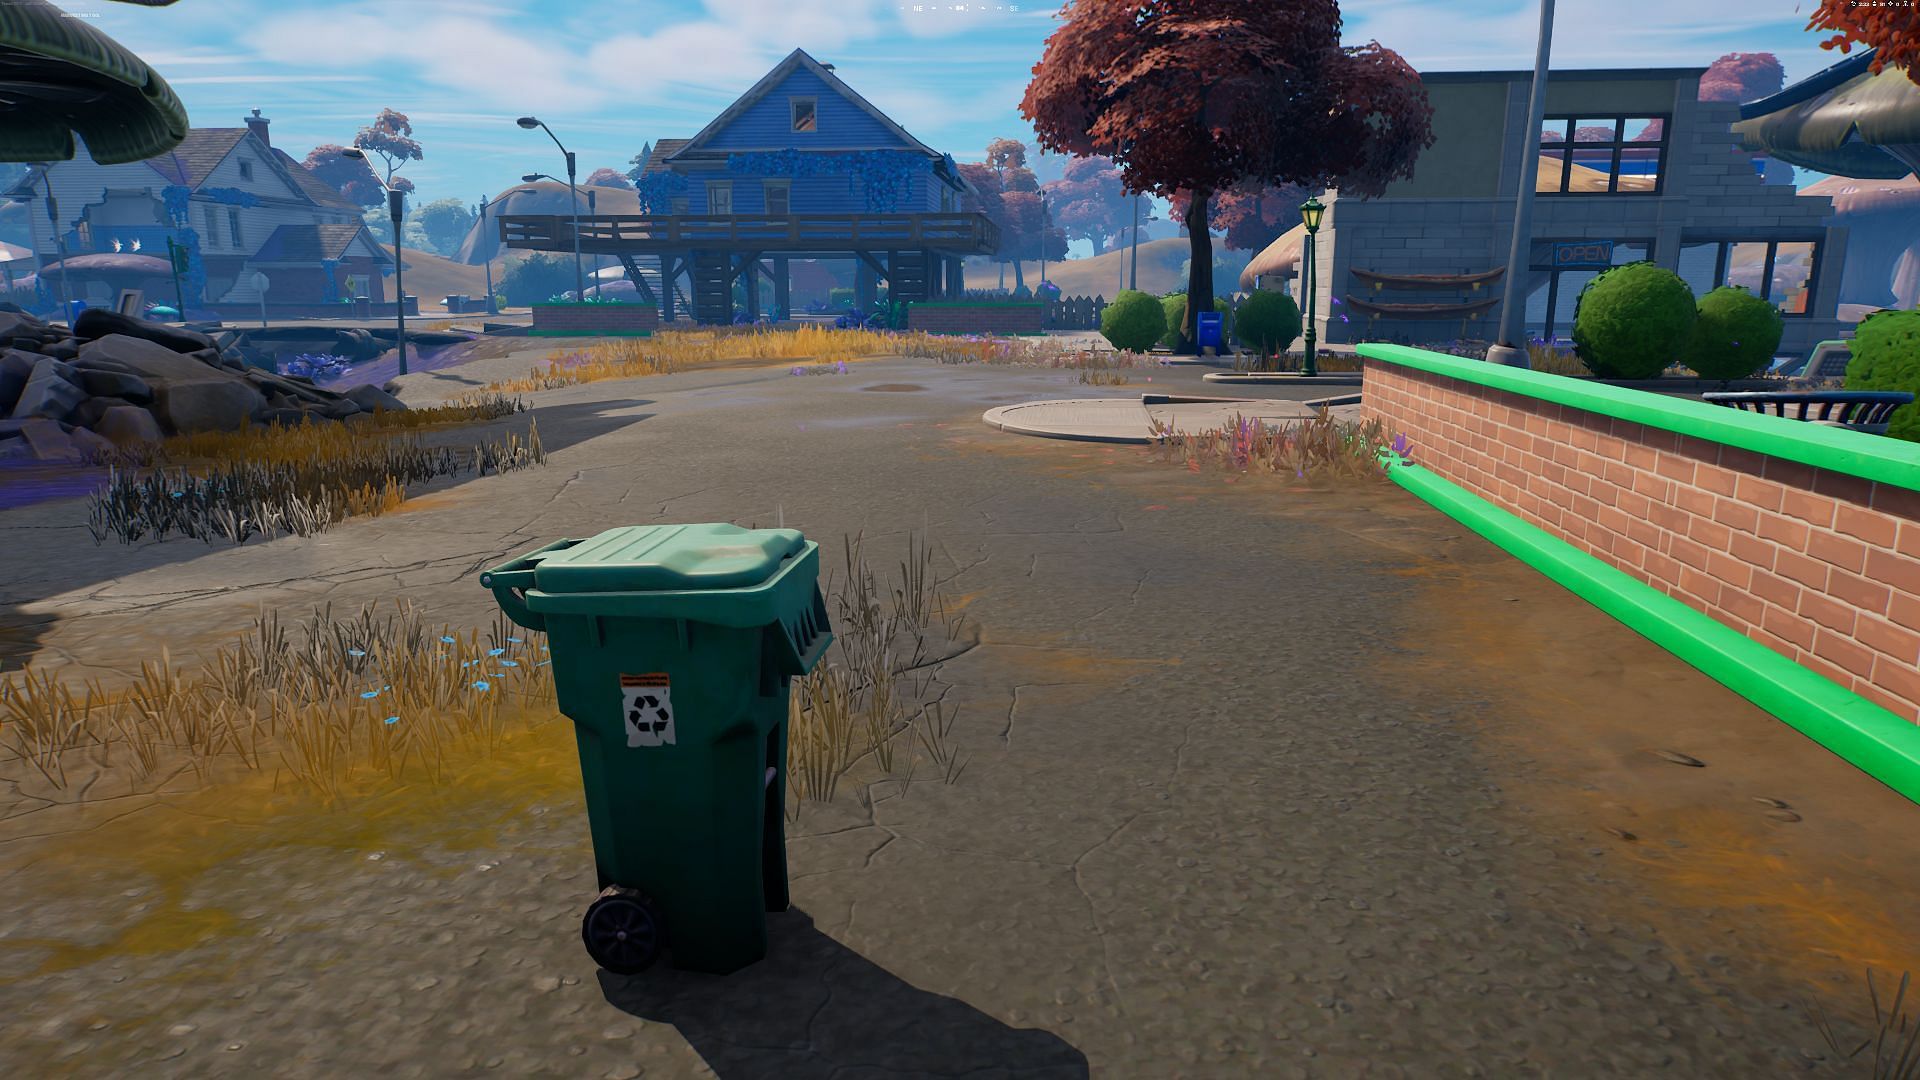 Nothing to see here, just a normal trash can (Image via Epic Games/Fortnite)